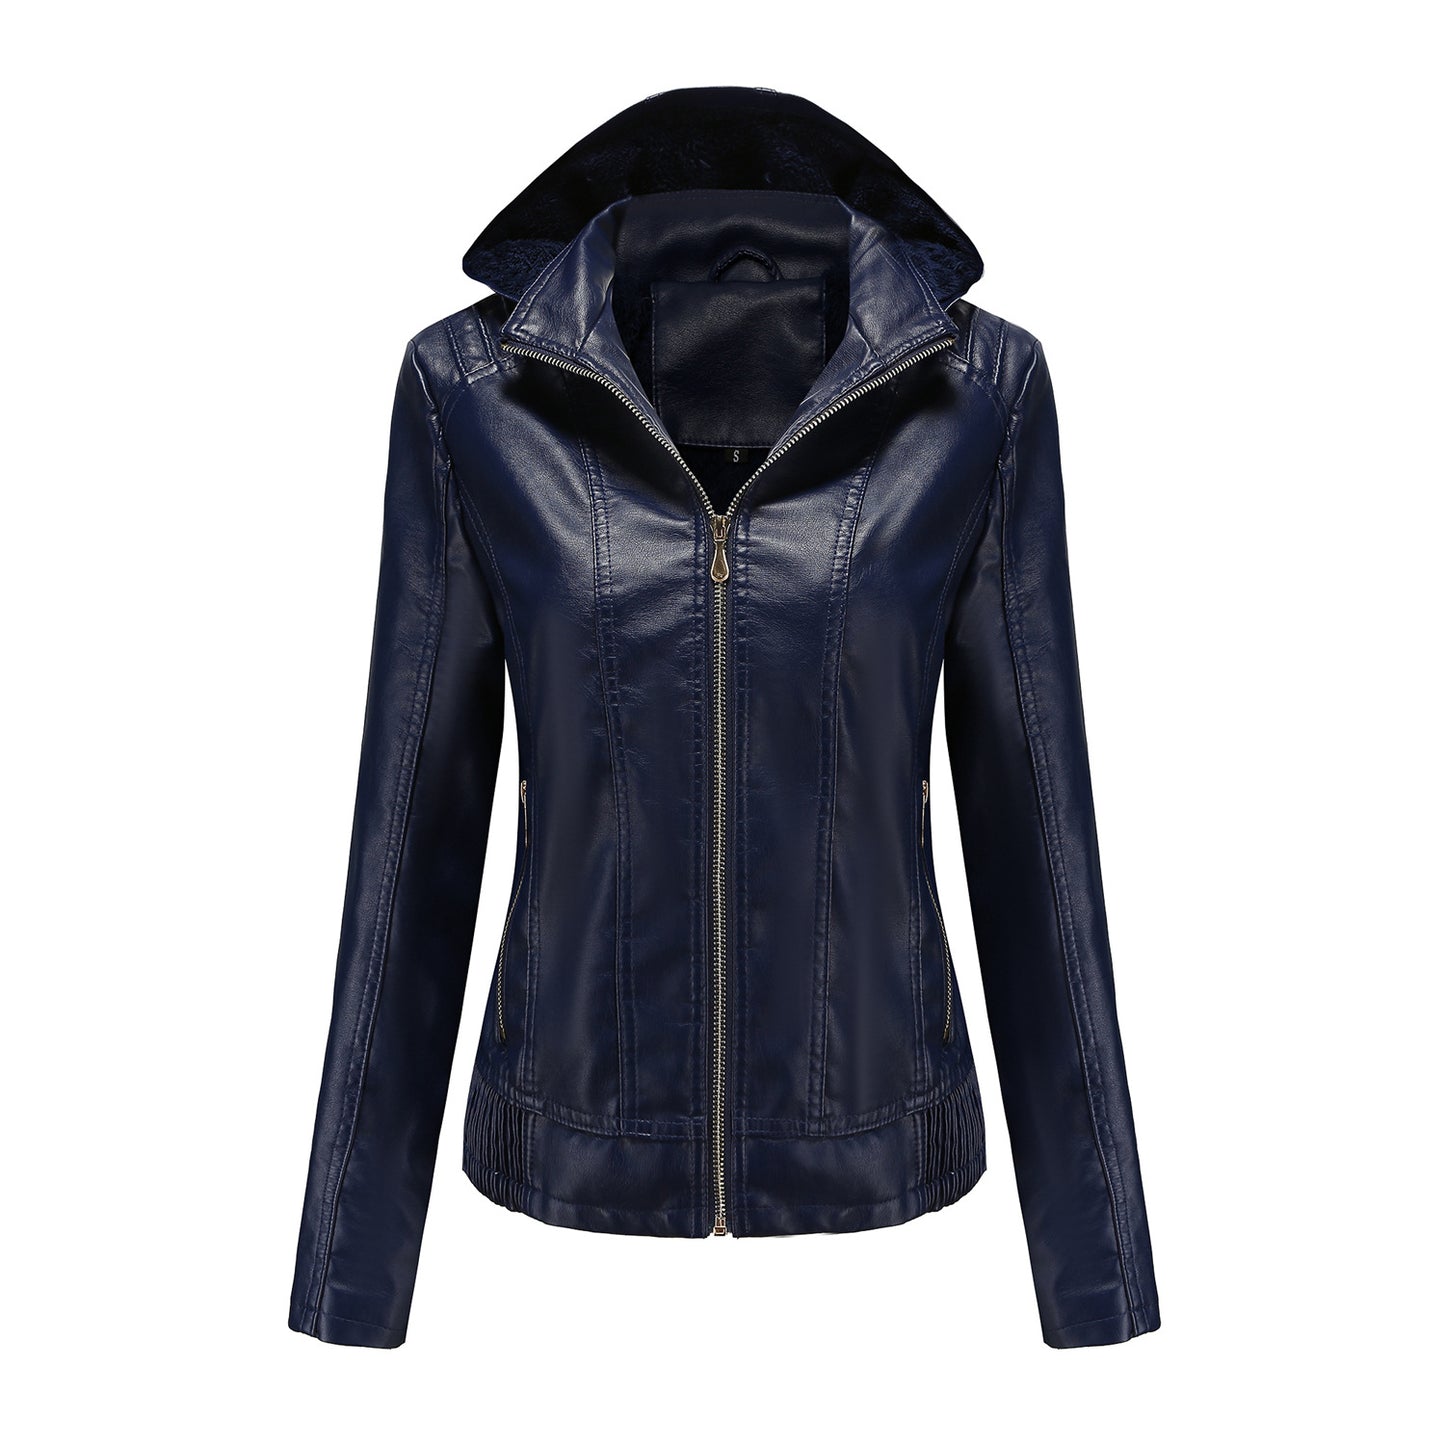 Leather Plush Winter Jacket For Women